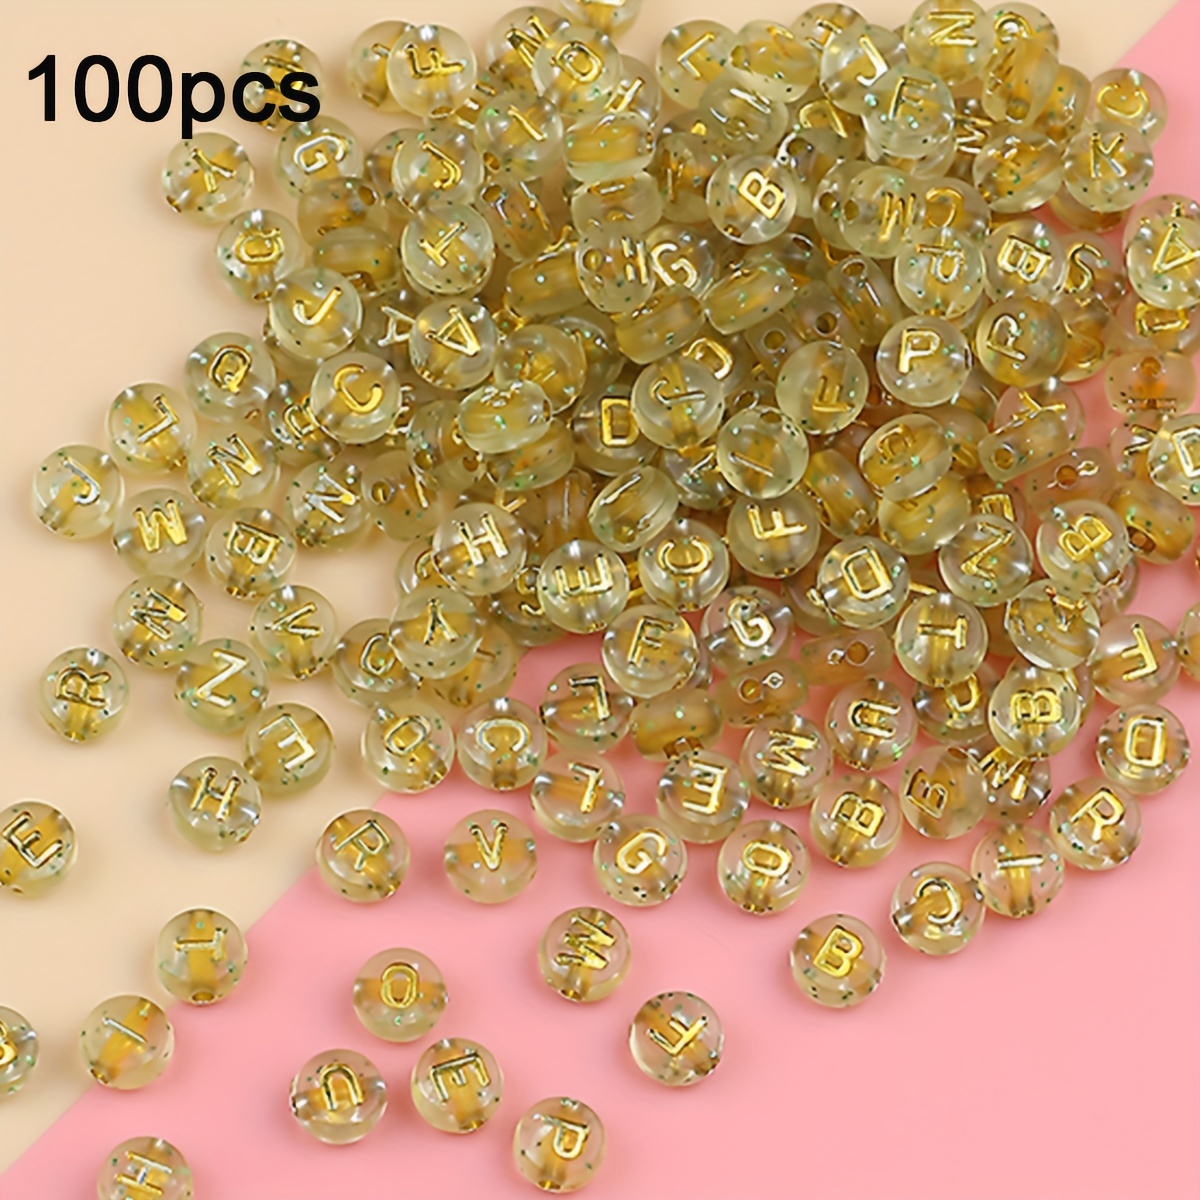 Solid Brass Bead, 7mm 100pc